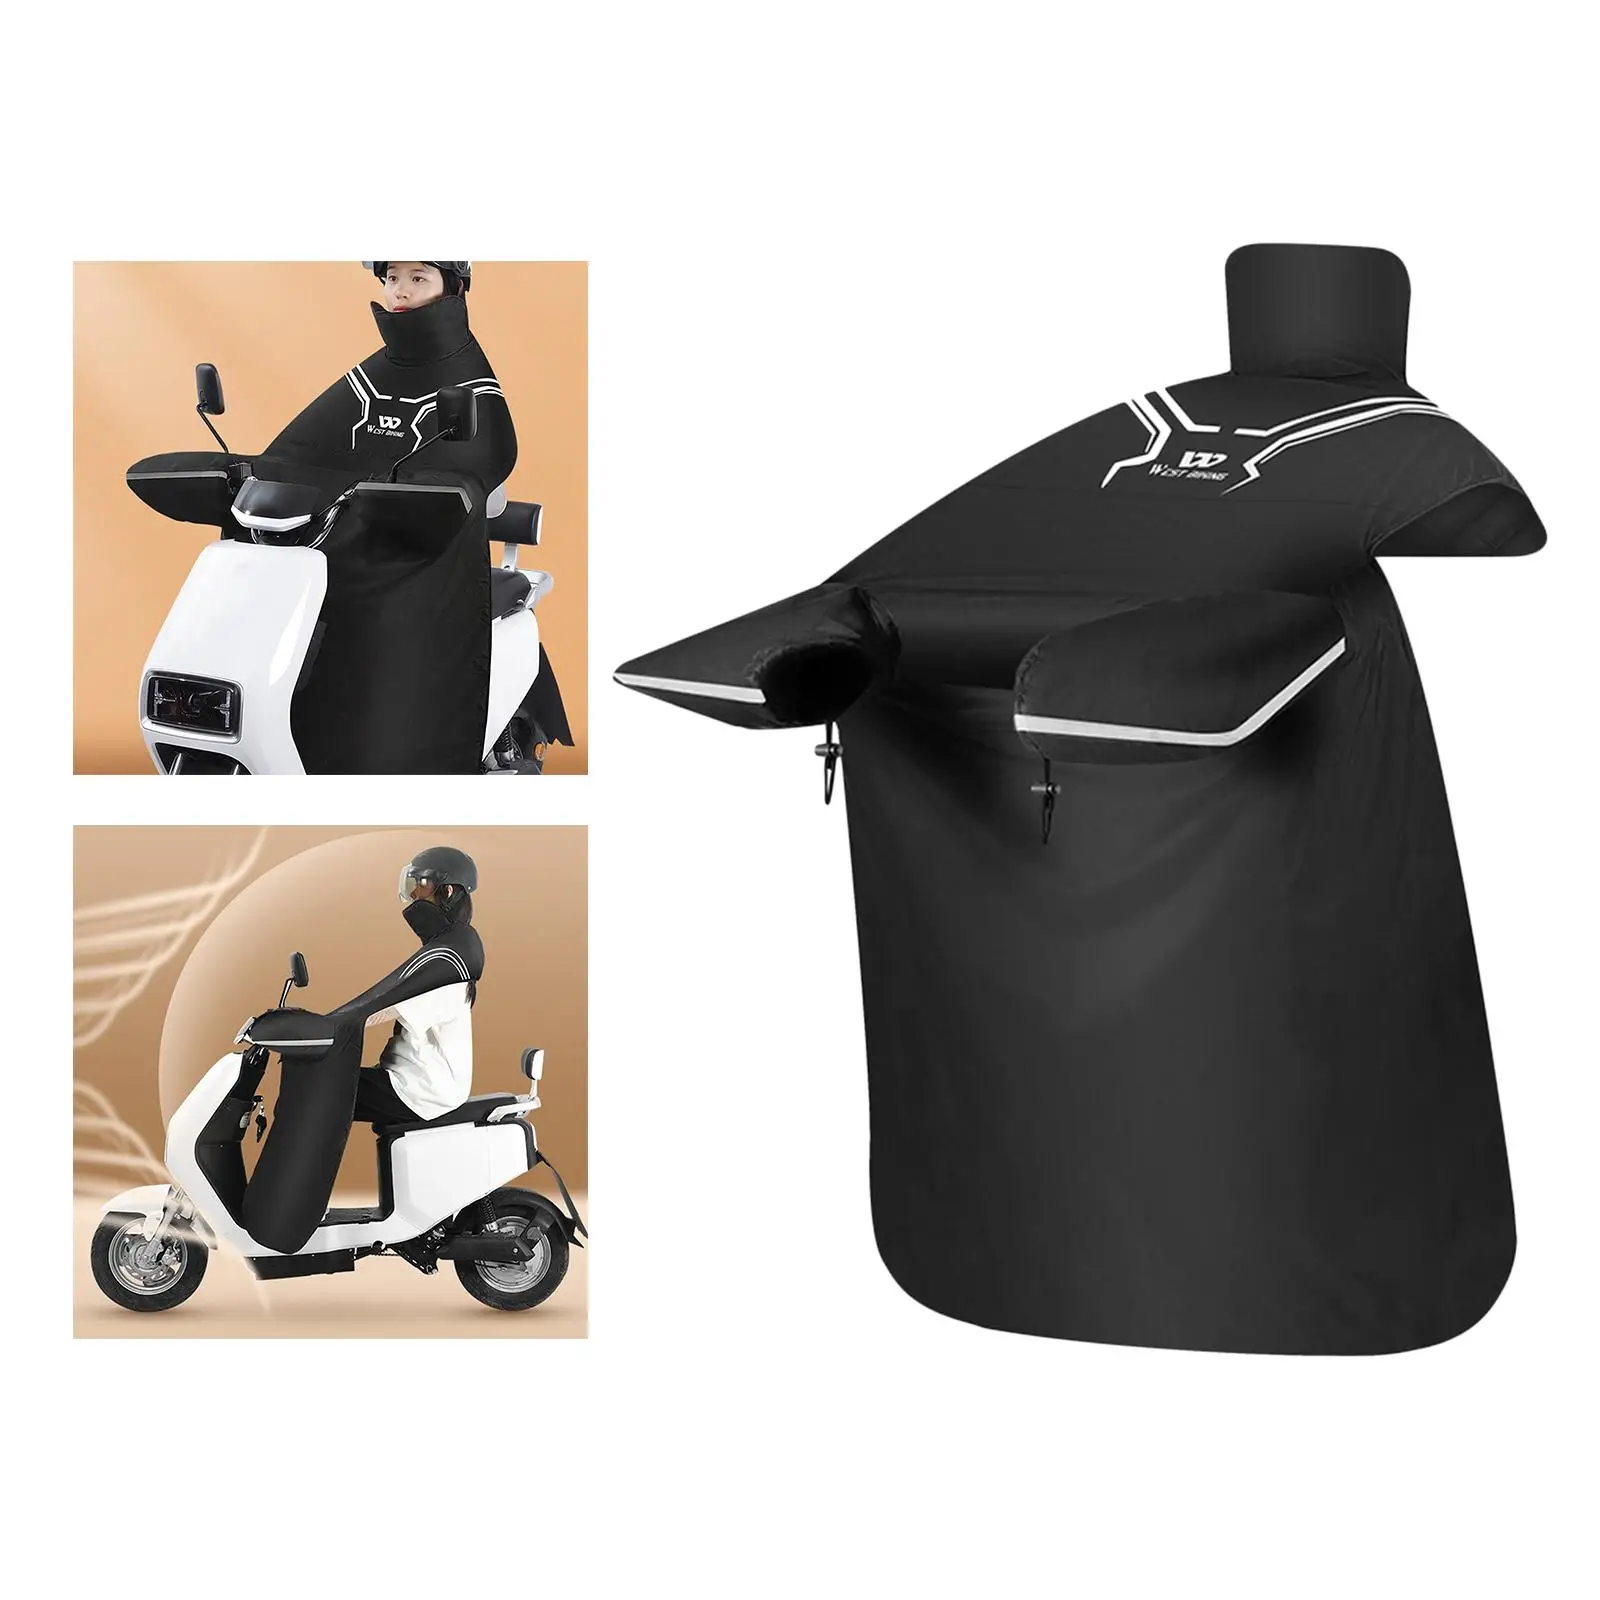 Motorcycle Scooter Apron protection Winter Warmer Knee Waterproof